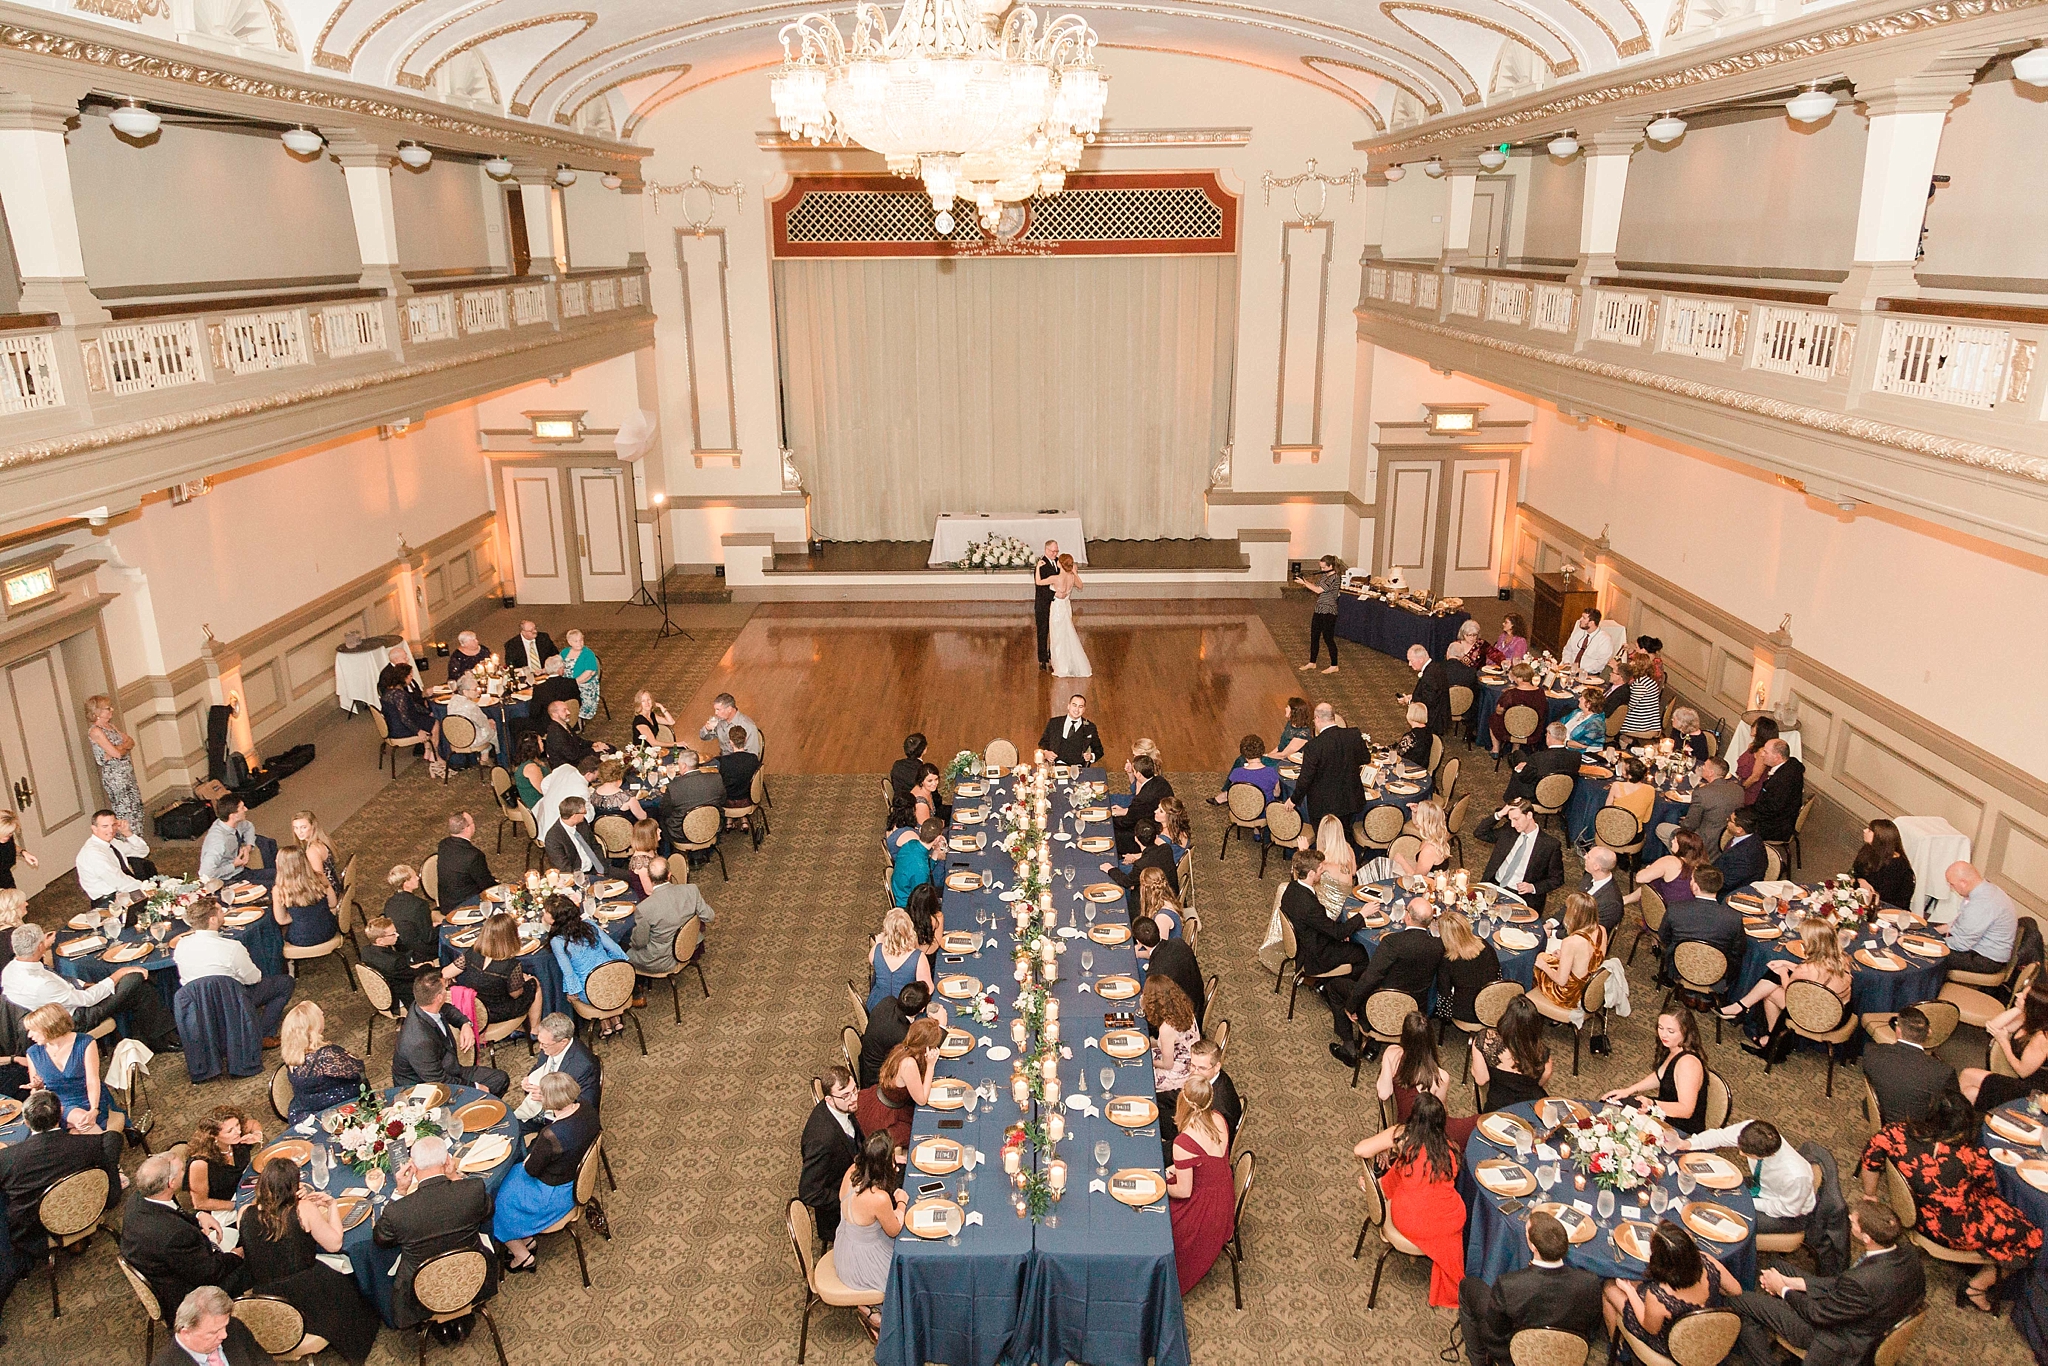 These September "I do's" took place during an art-deco inspired wedding at the John Marshall Ballrooms in Richmond, VA.